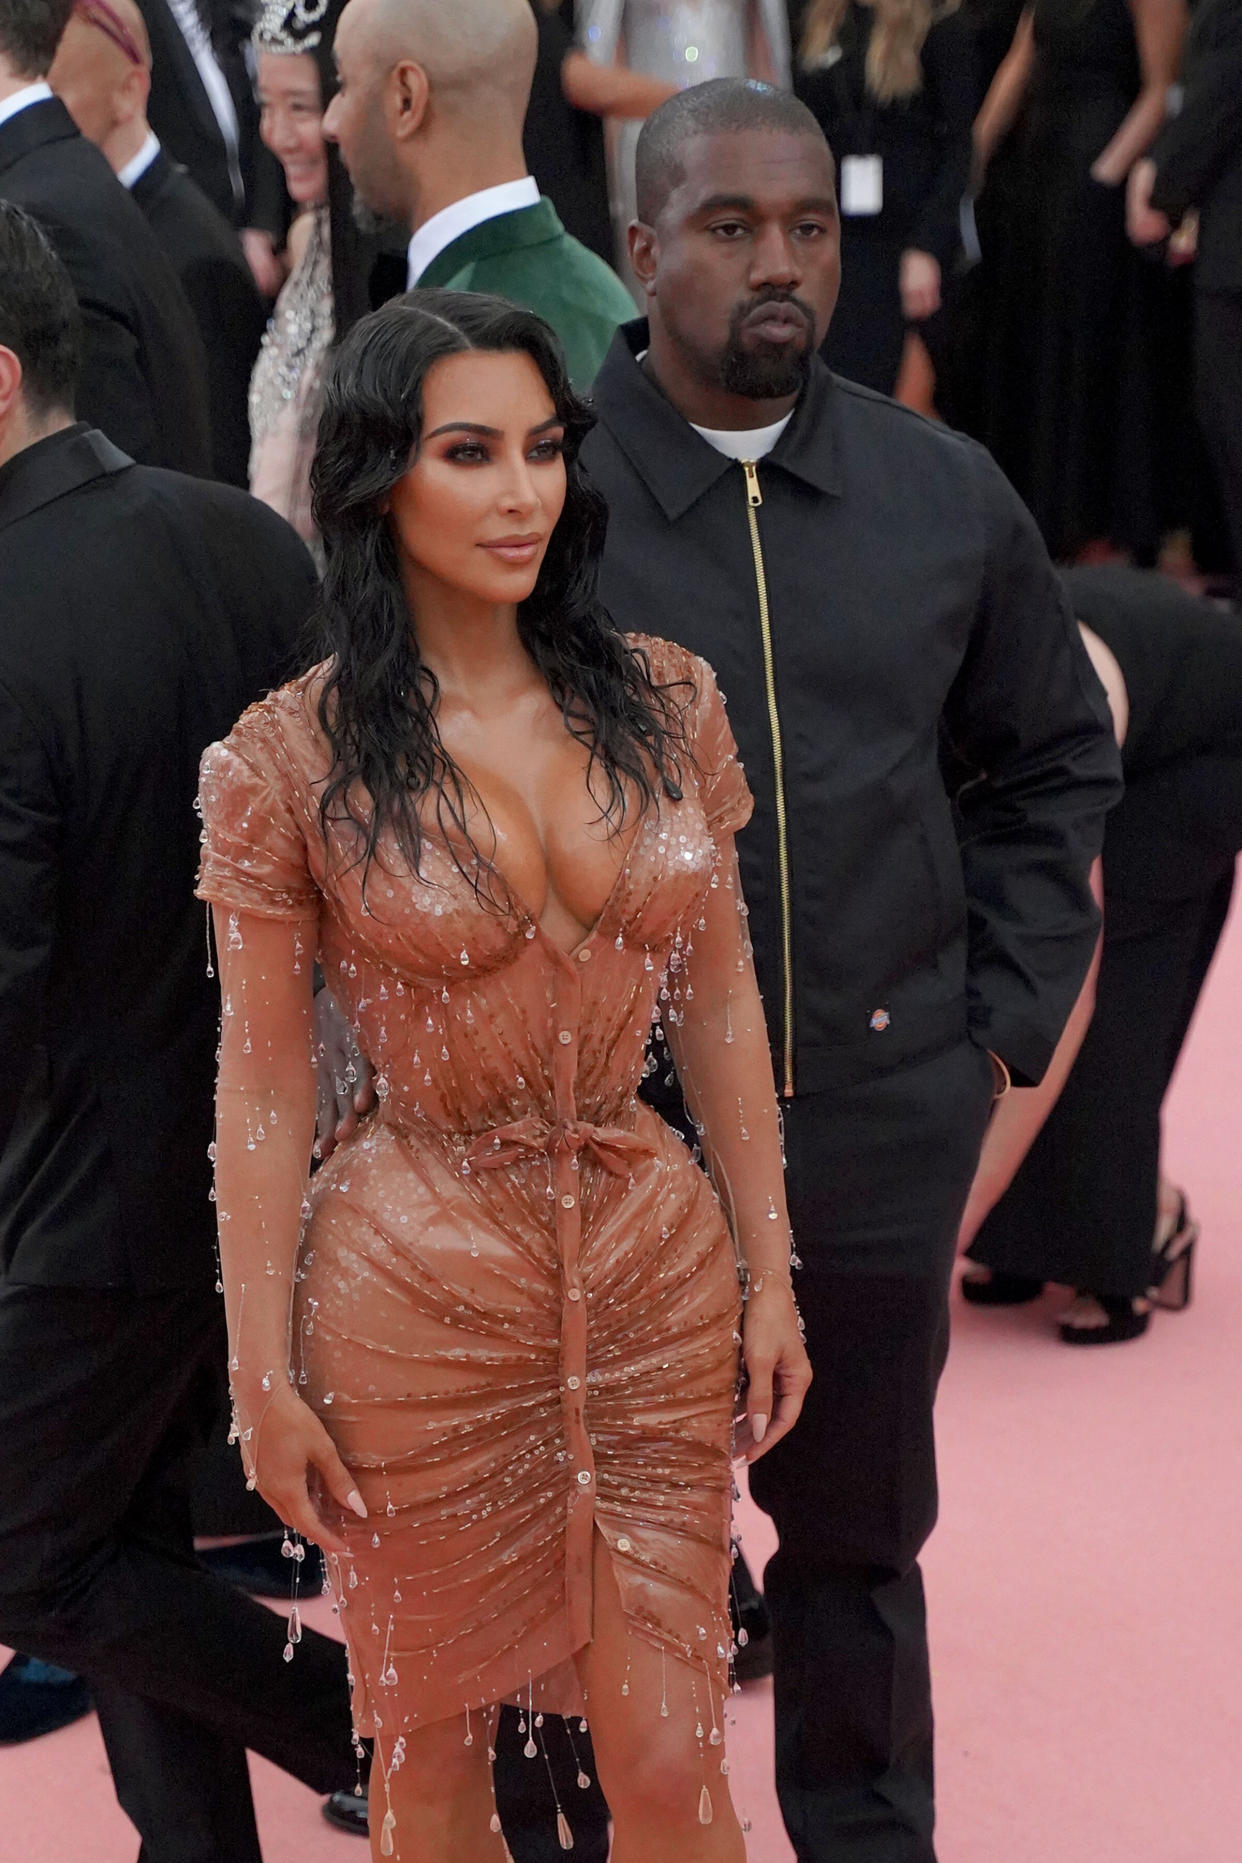 NEW YORK, NY - MAY 6: Kanye West and Kim Kardashian West attend The Metropolitan Museum Of Art's 2019 Costume Institute Benefit "Camp: Notes On Fashion" at Metropolitan Museum of Art on May 6, 2019 in New York City. (Photo by Sean Zanni/Patrick McMullan via Getty Images)